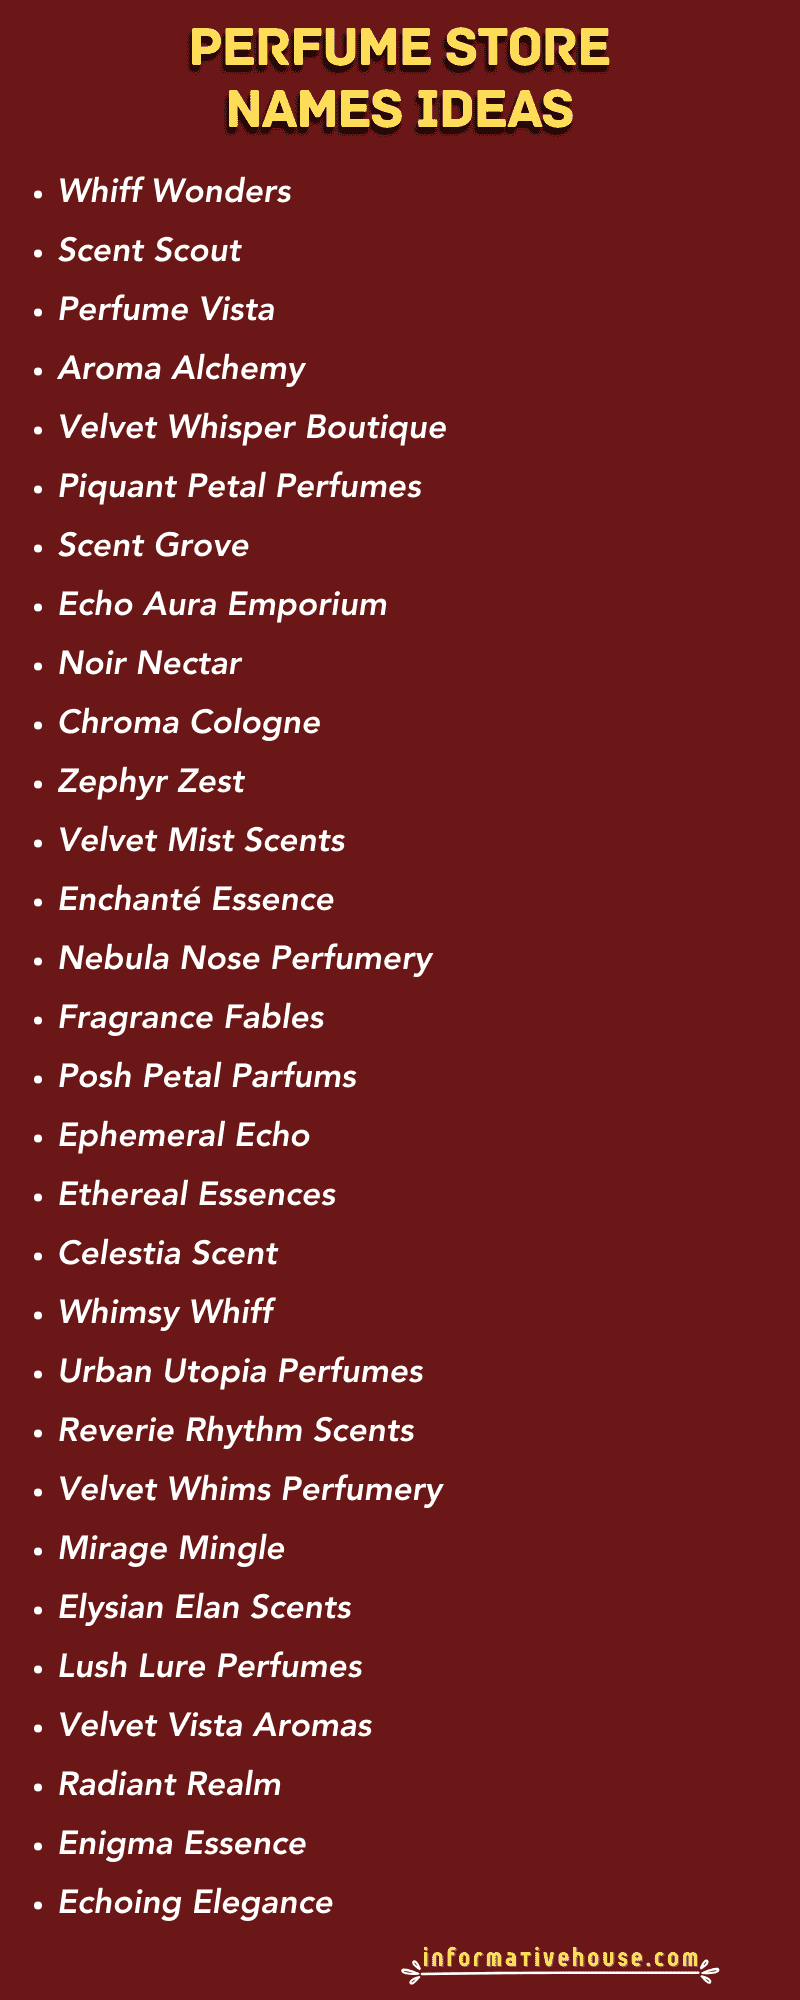 Perfume Store Names Ideas for perfume business startup